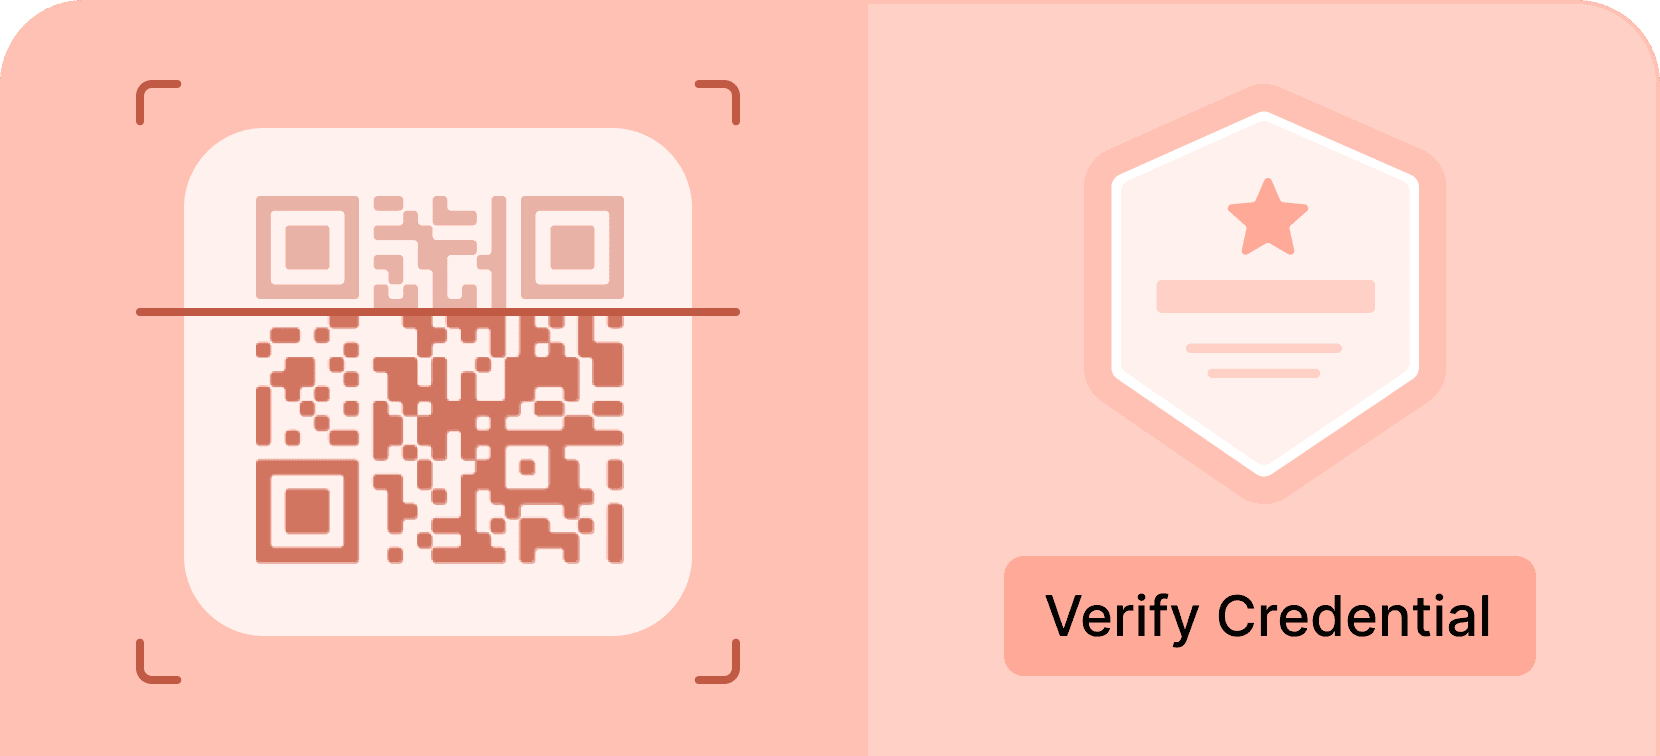 Generate easily verifiable credentials - Certifier features